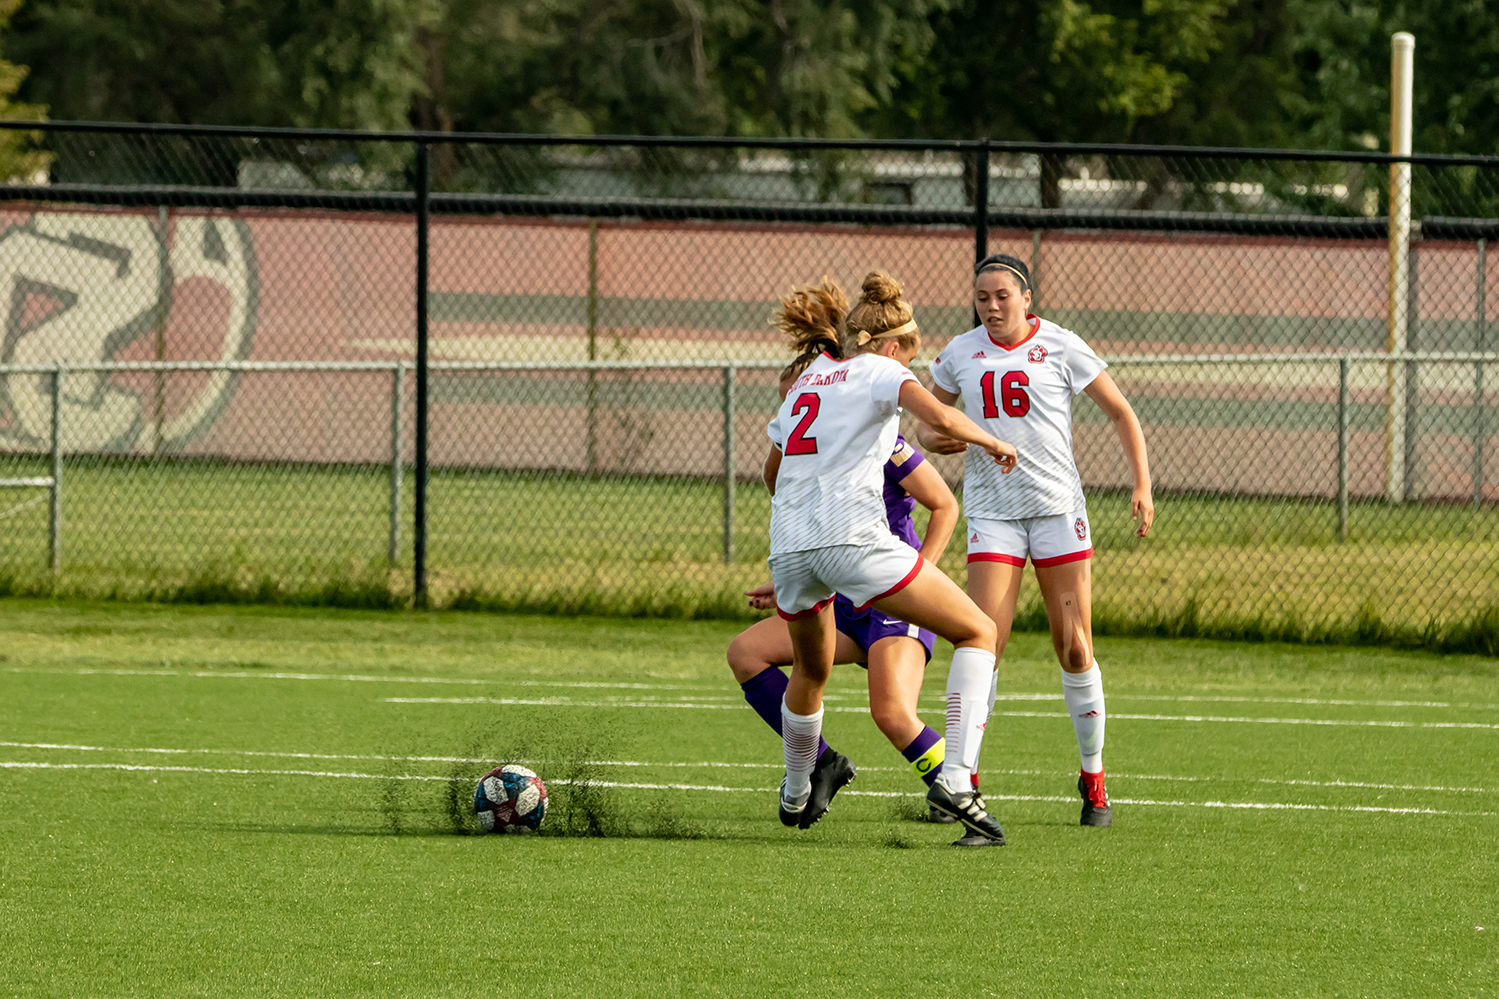 Coyotes fall to Northern Iowa in hectic second half